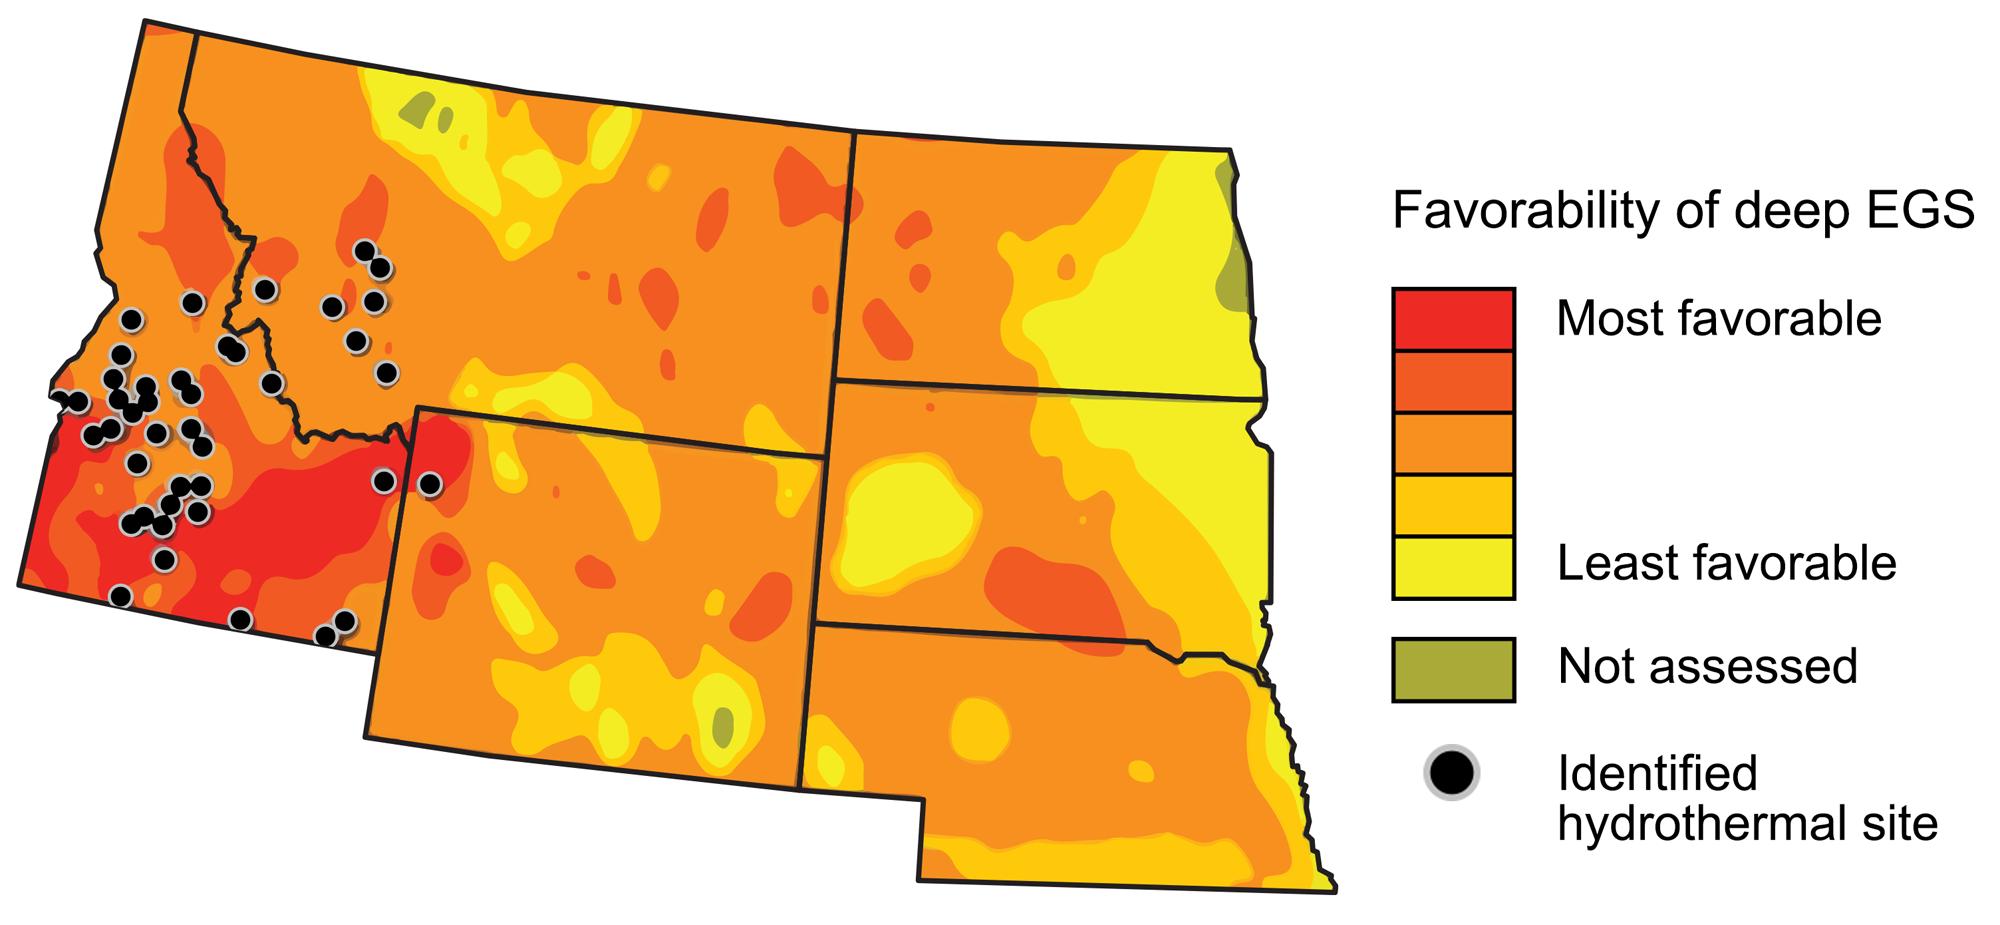 Map of the northwest-central region with state boundaries outlined in black. The geothermal energy potential of the area is indicated by shading, ranging from yellow (least favorable) to red (most favorable). Black dots indicate identified geothermal sites. Idaho and western Wyoming are the most favorable for geothermal development, and most hydrothermal sites are in Idaho, with some additional sites in western Montana and Wyoming.